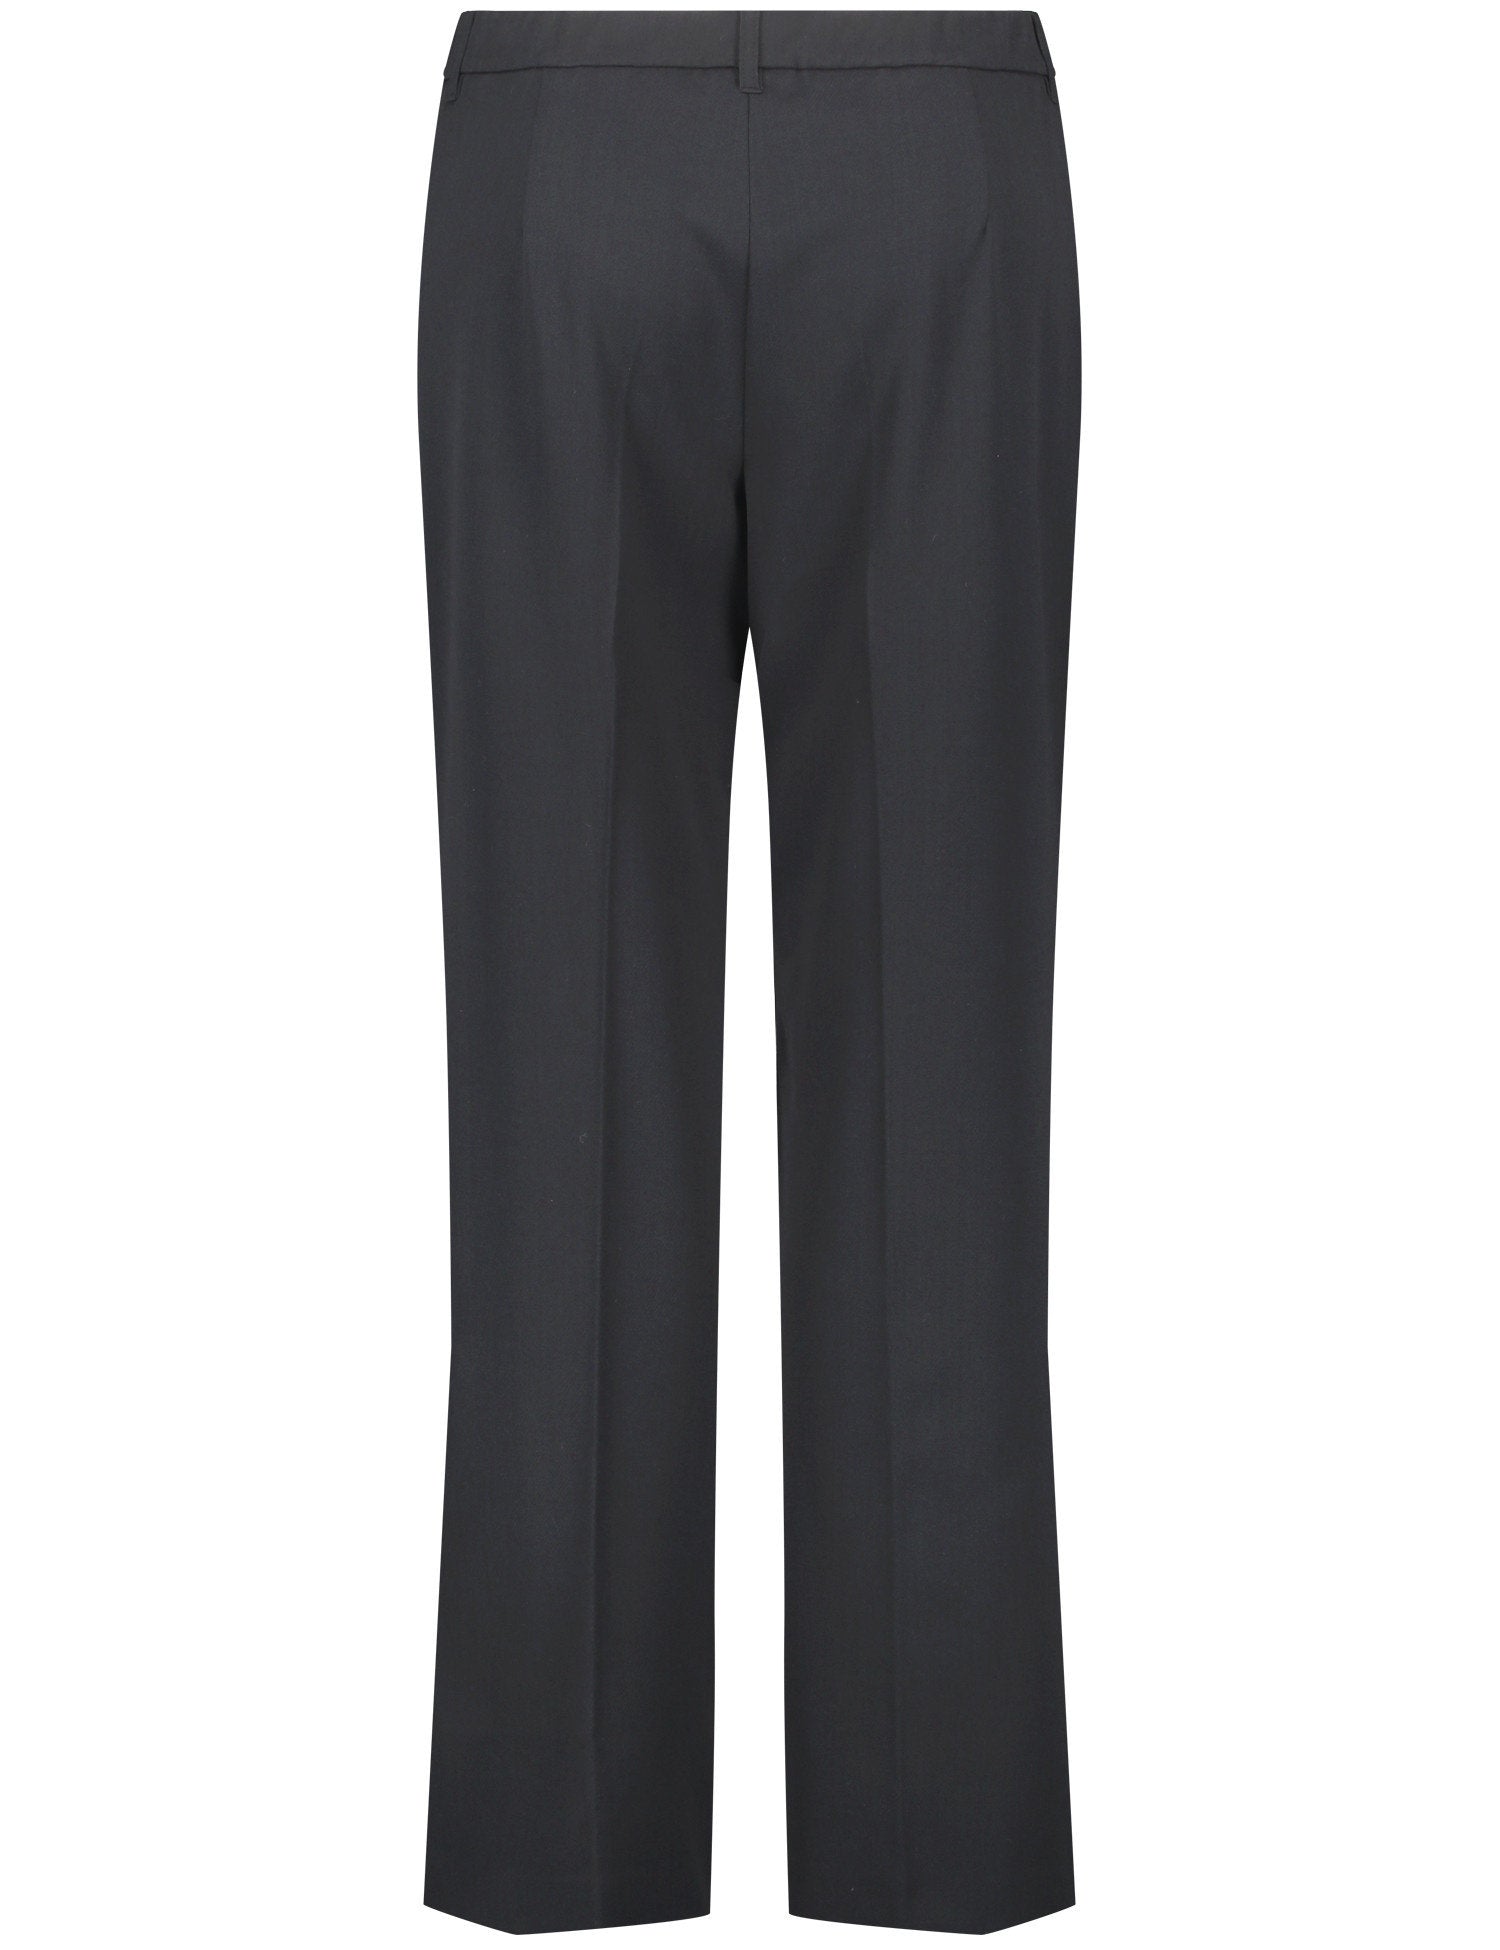 Smart Trousers With A Wide Leg, Greta_320222-21321_2260_03